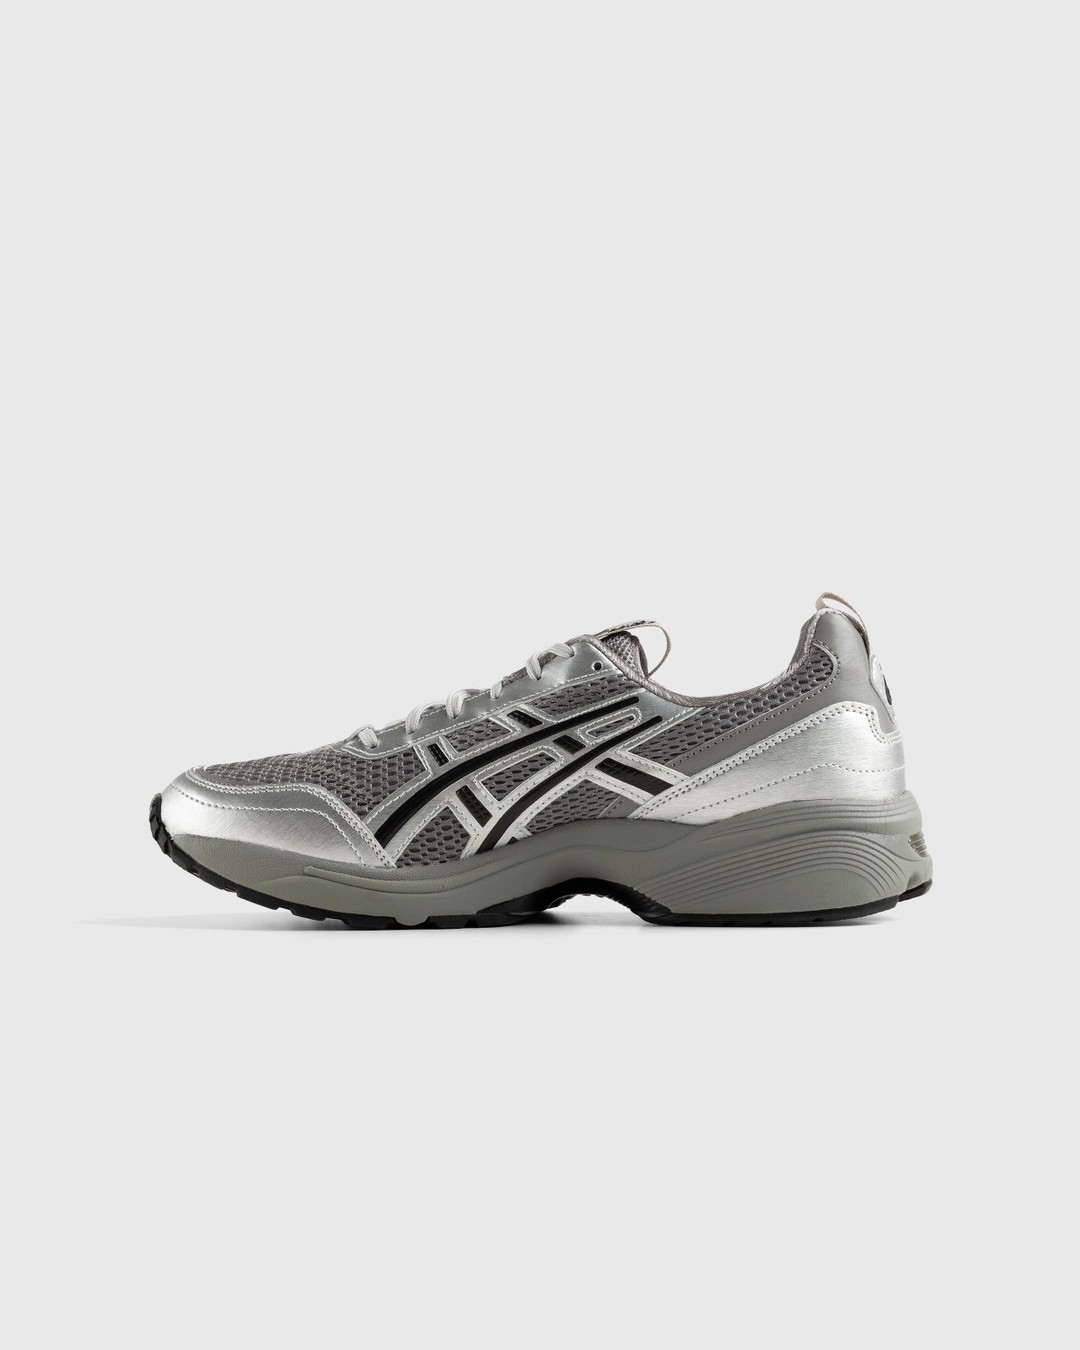 asics – GEL-1090v2 Freja Wewer Edition Silver - Low Top Sneakers - Silver - Image 2